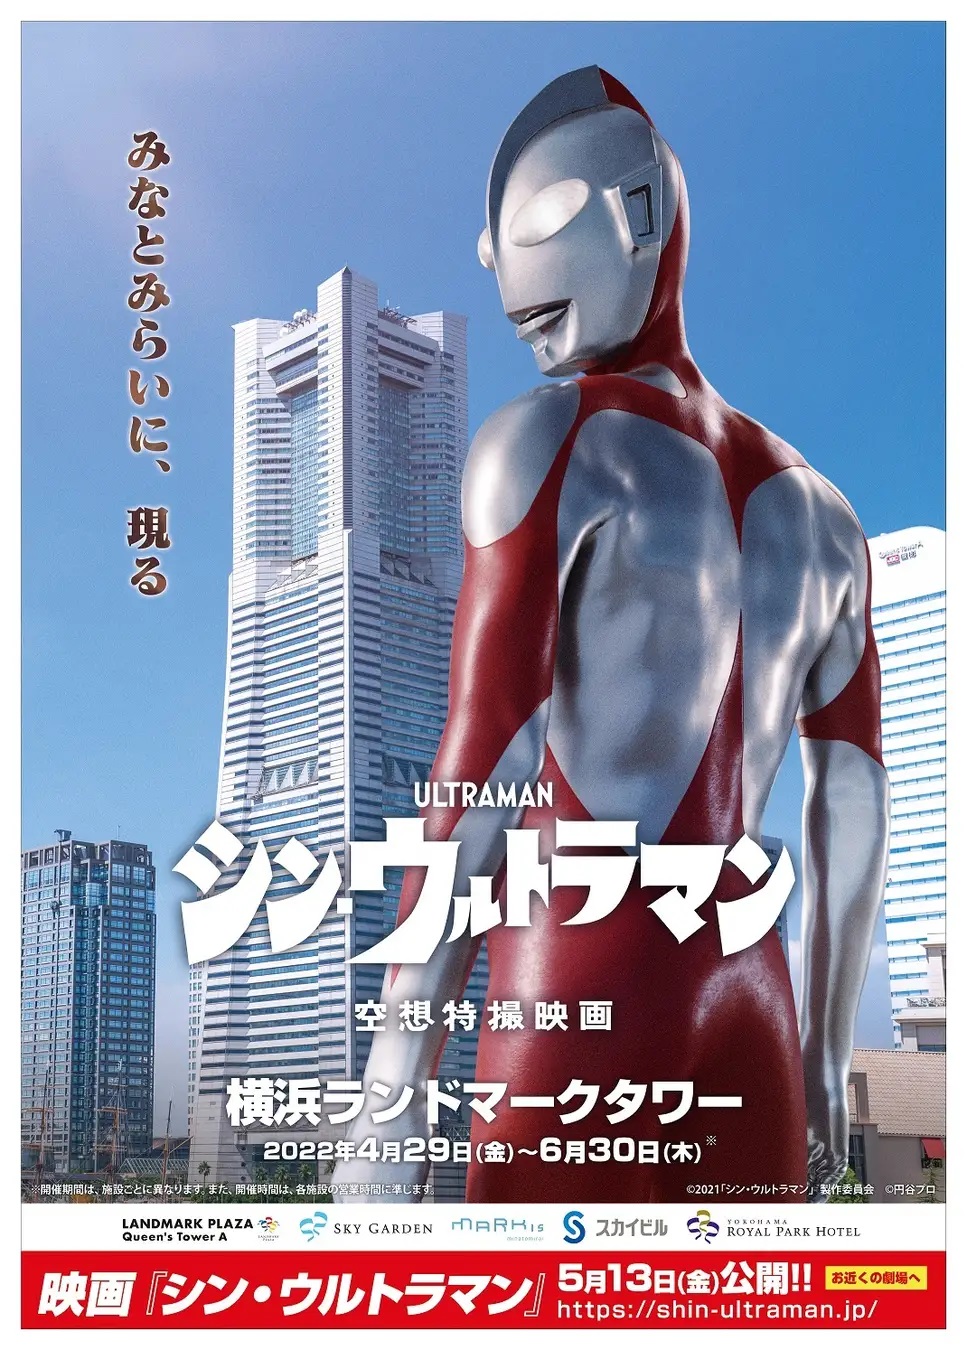 A promotional poster for the Shin Ultraman Yokohama Landmark Tower collaboration event featuring a giant-sized Shin Ultraman posing in front of the skyscrapers of Yokohama.